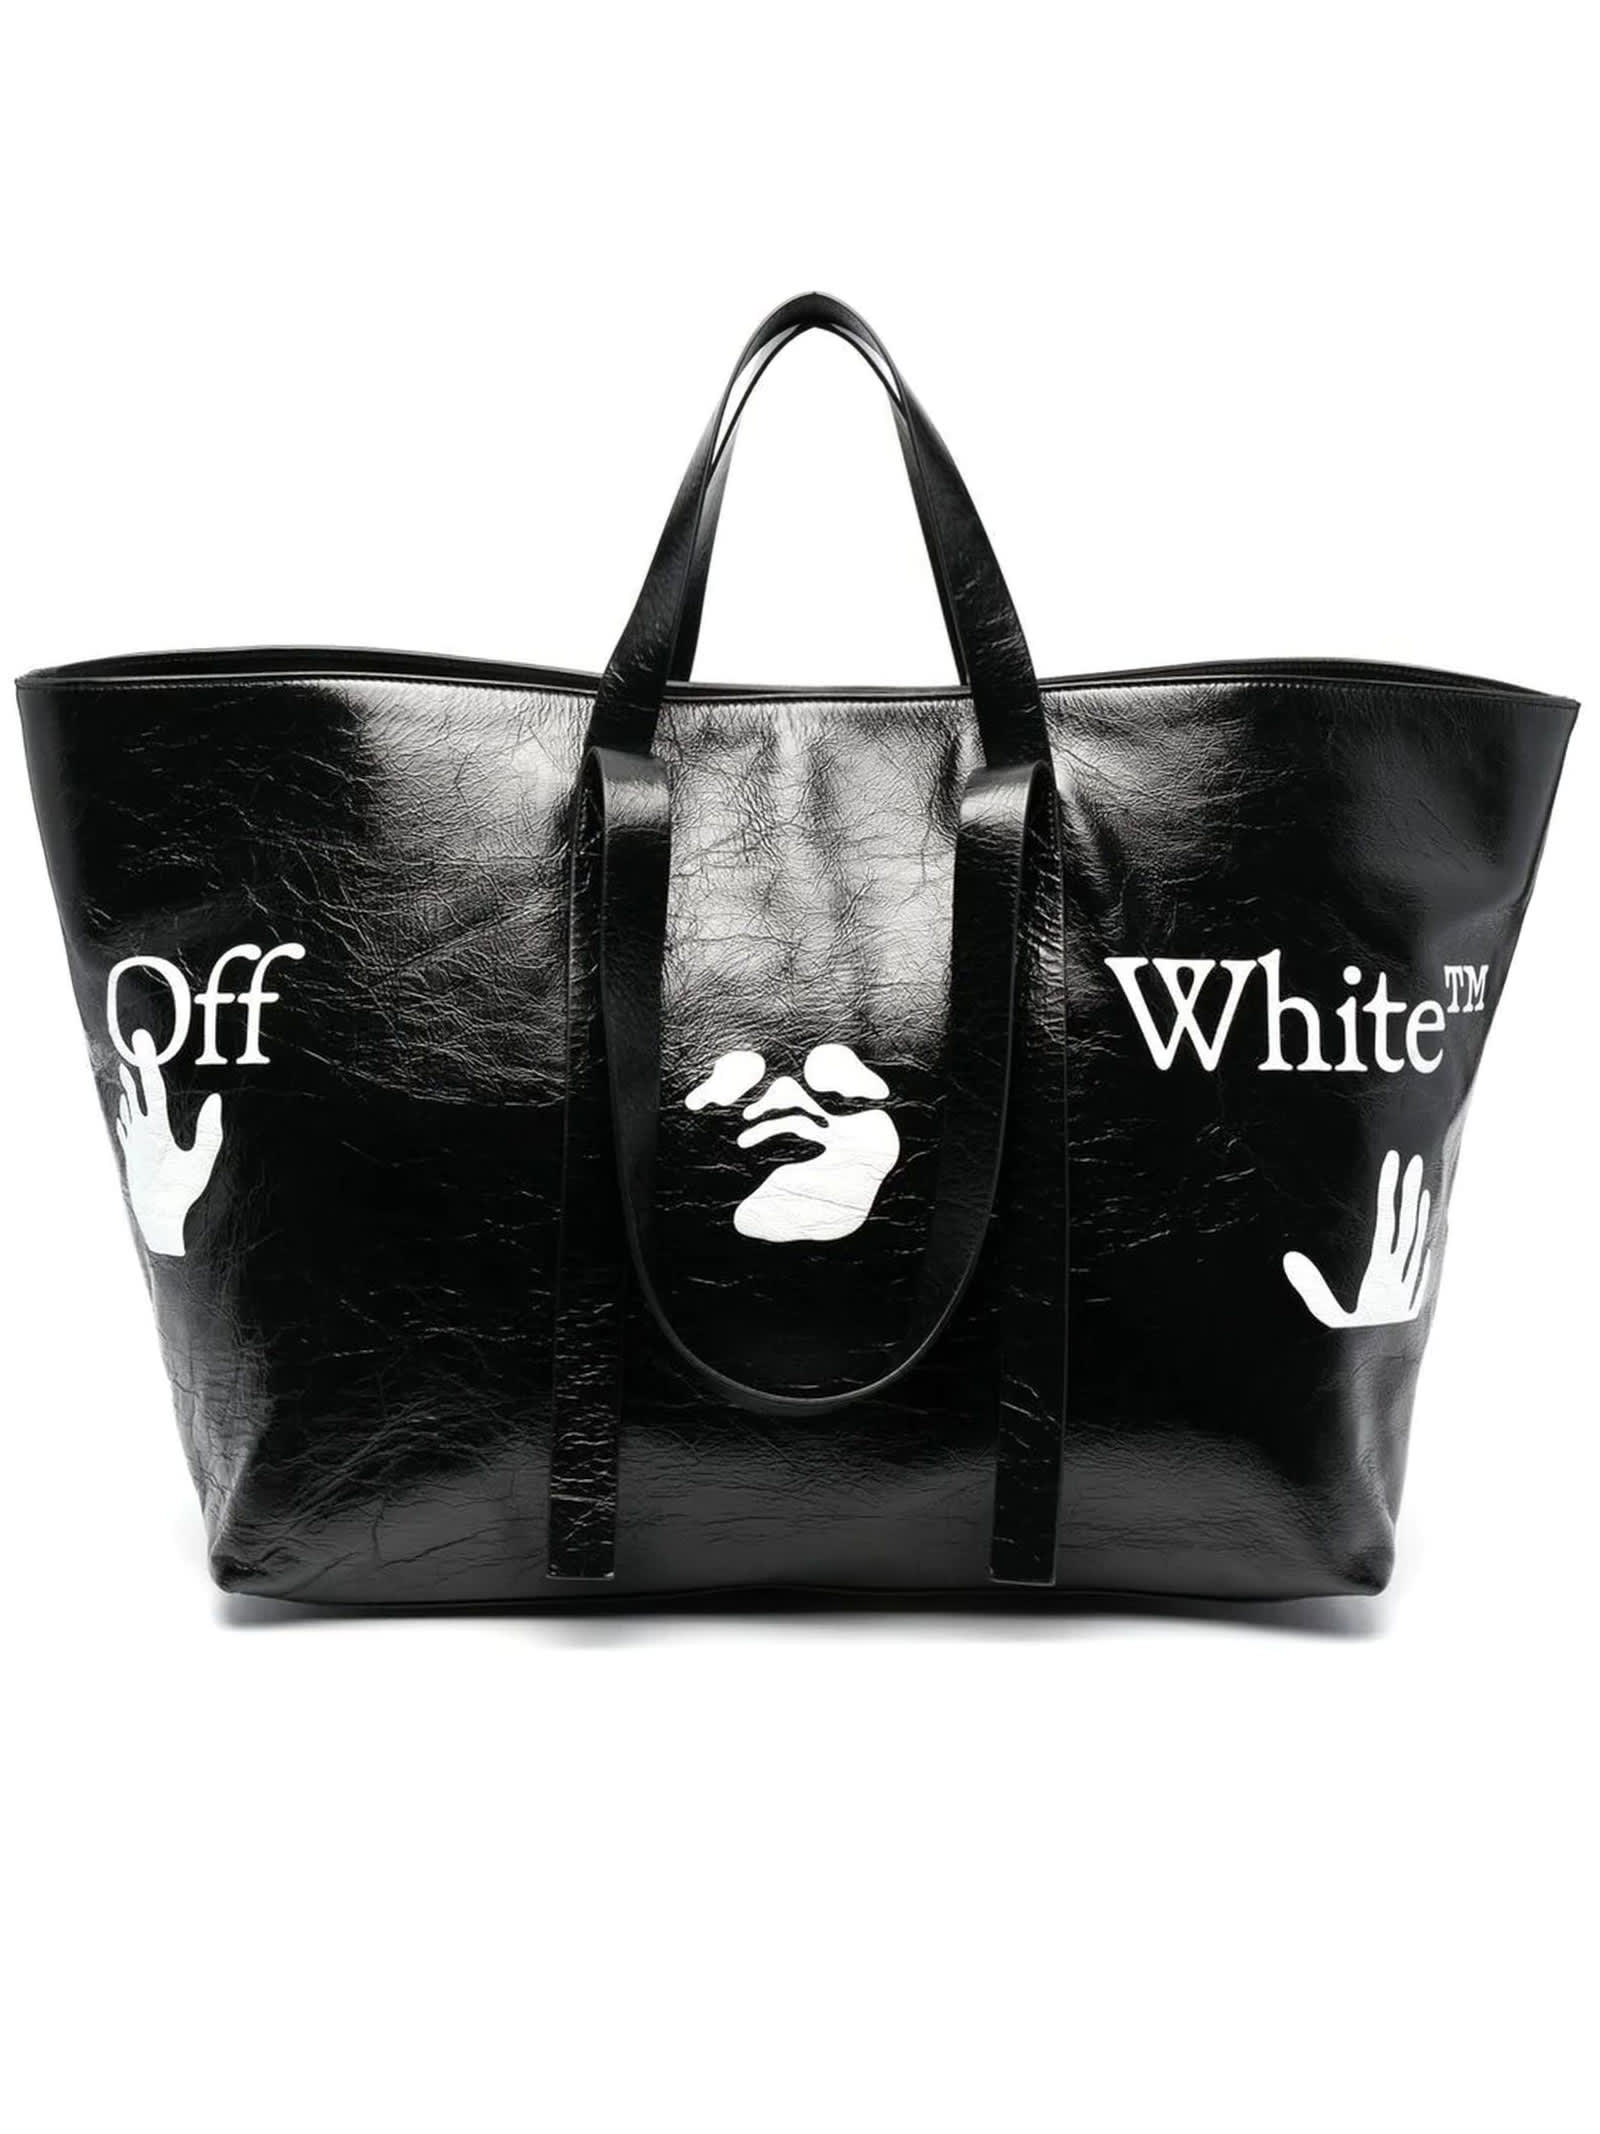 OFF-WHITE BLACK COMMERCIAL TOTE BAG,OWNA094S21LEA001 1001